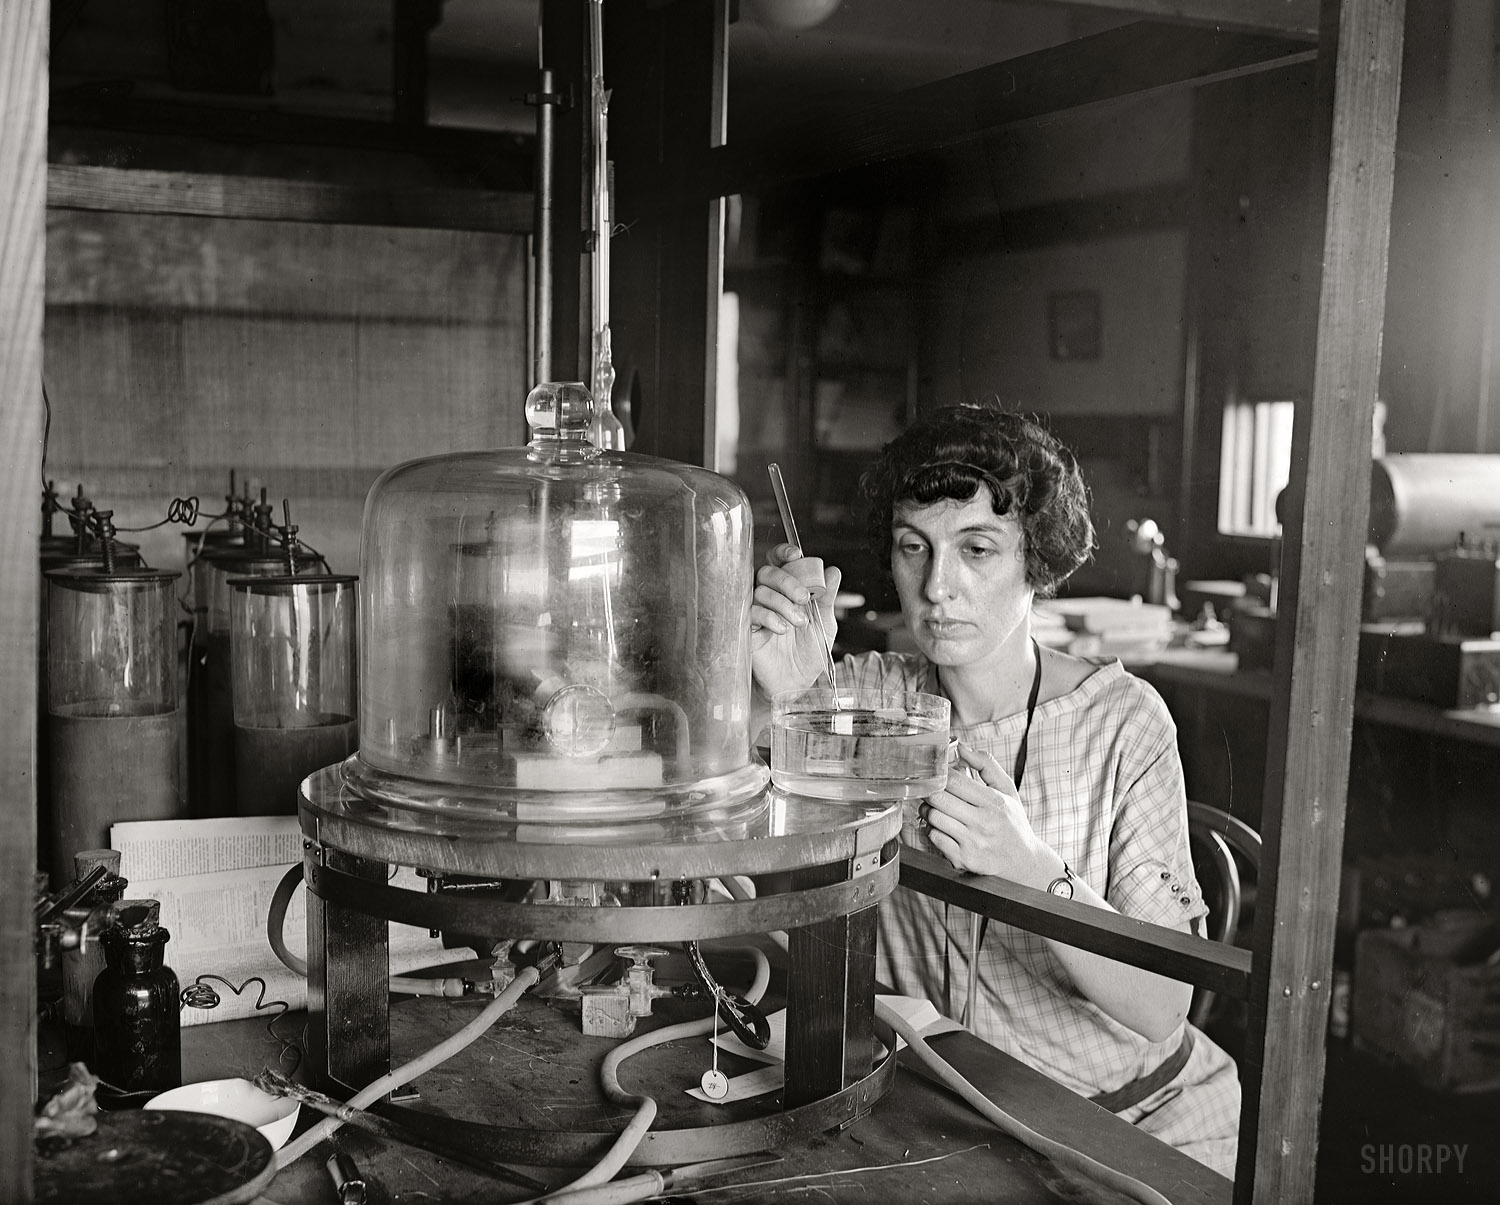 Washington, August 18, 1924. "Miss V.P. Porter, Bureau of Standards." National Photo Company Collection glass negative, Library of Congress. View full size.